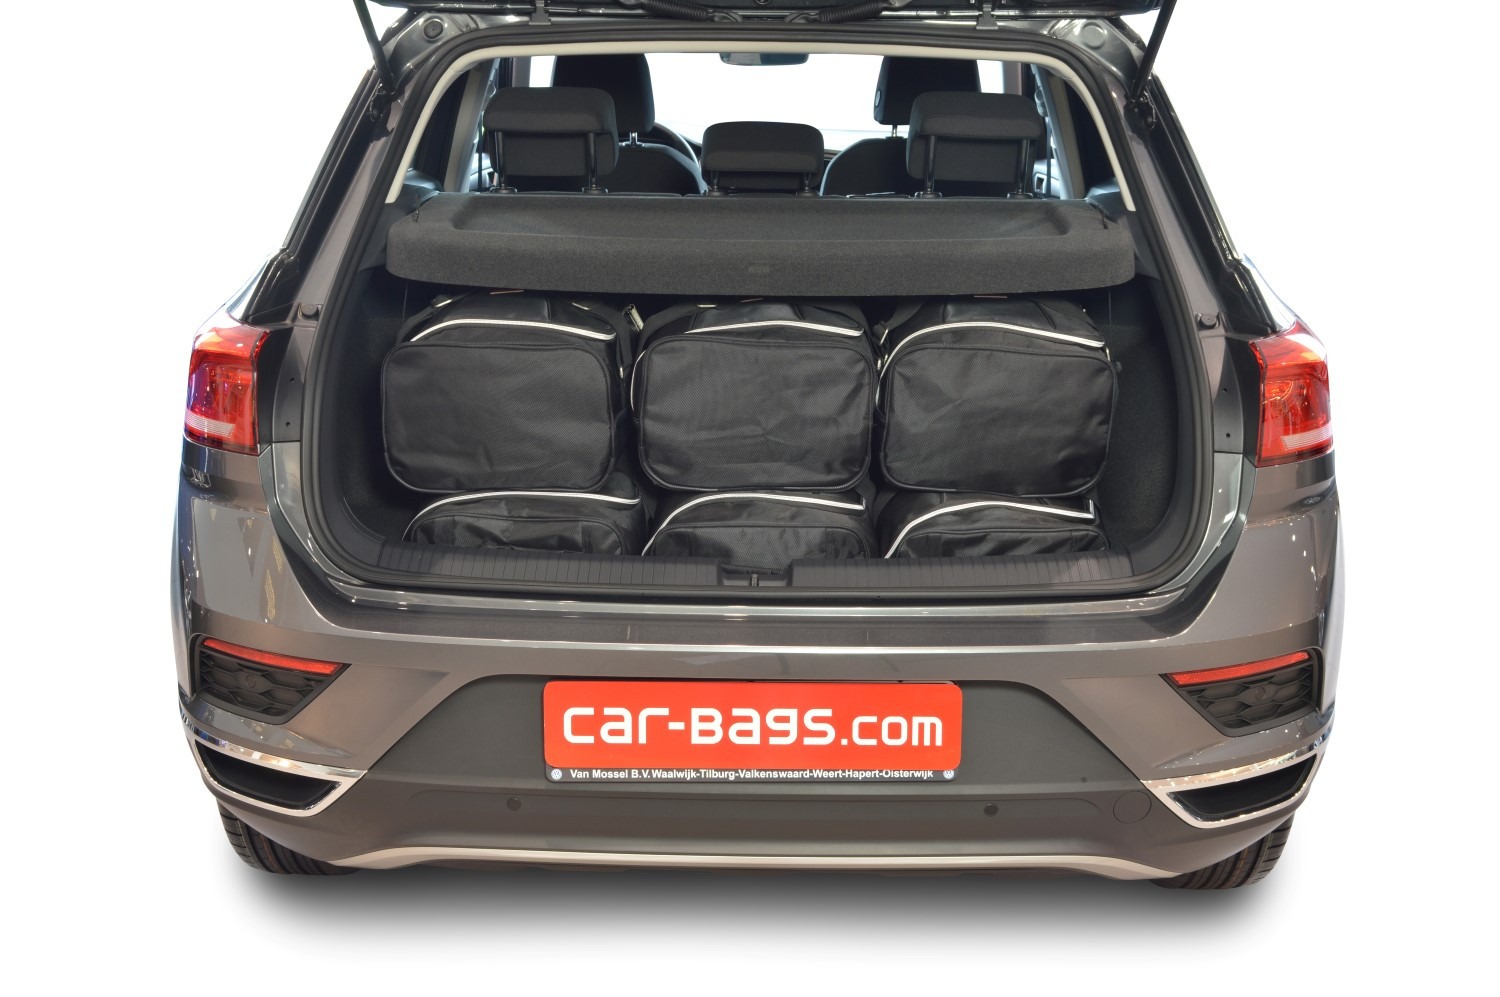 Volkswagen T-Roc 2017-Present Car-Bags Travel Bags Made in EU Perfect Fit